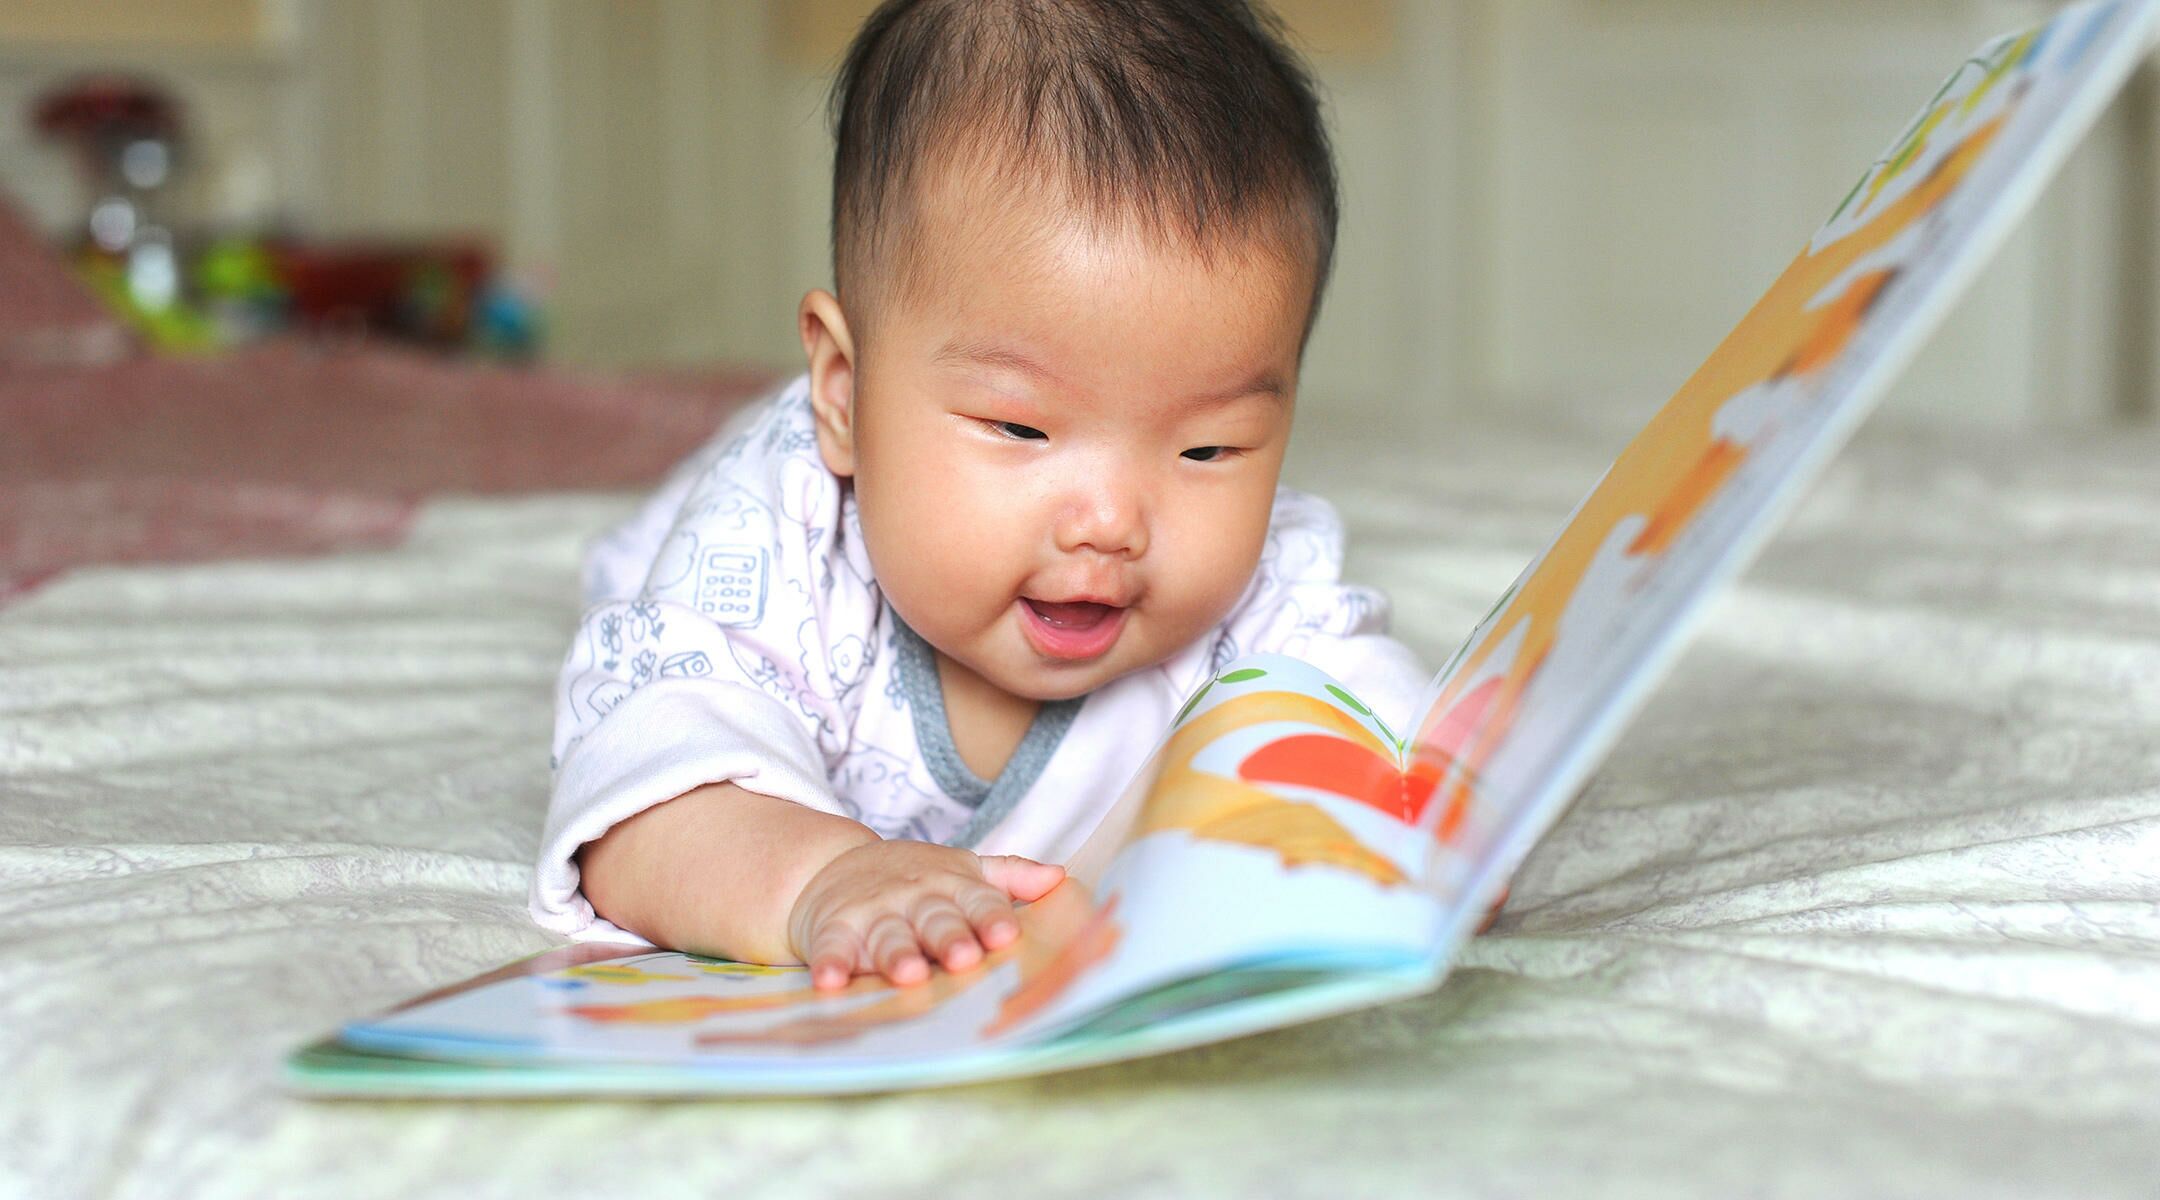 What Books Should I Be Reading to Baby?